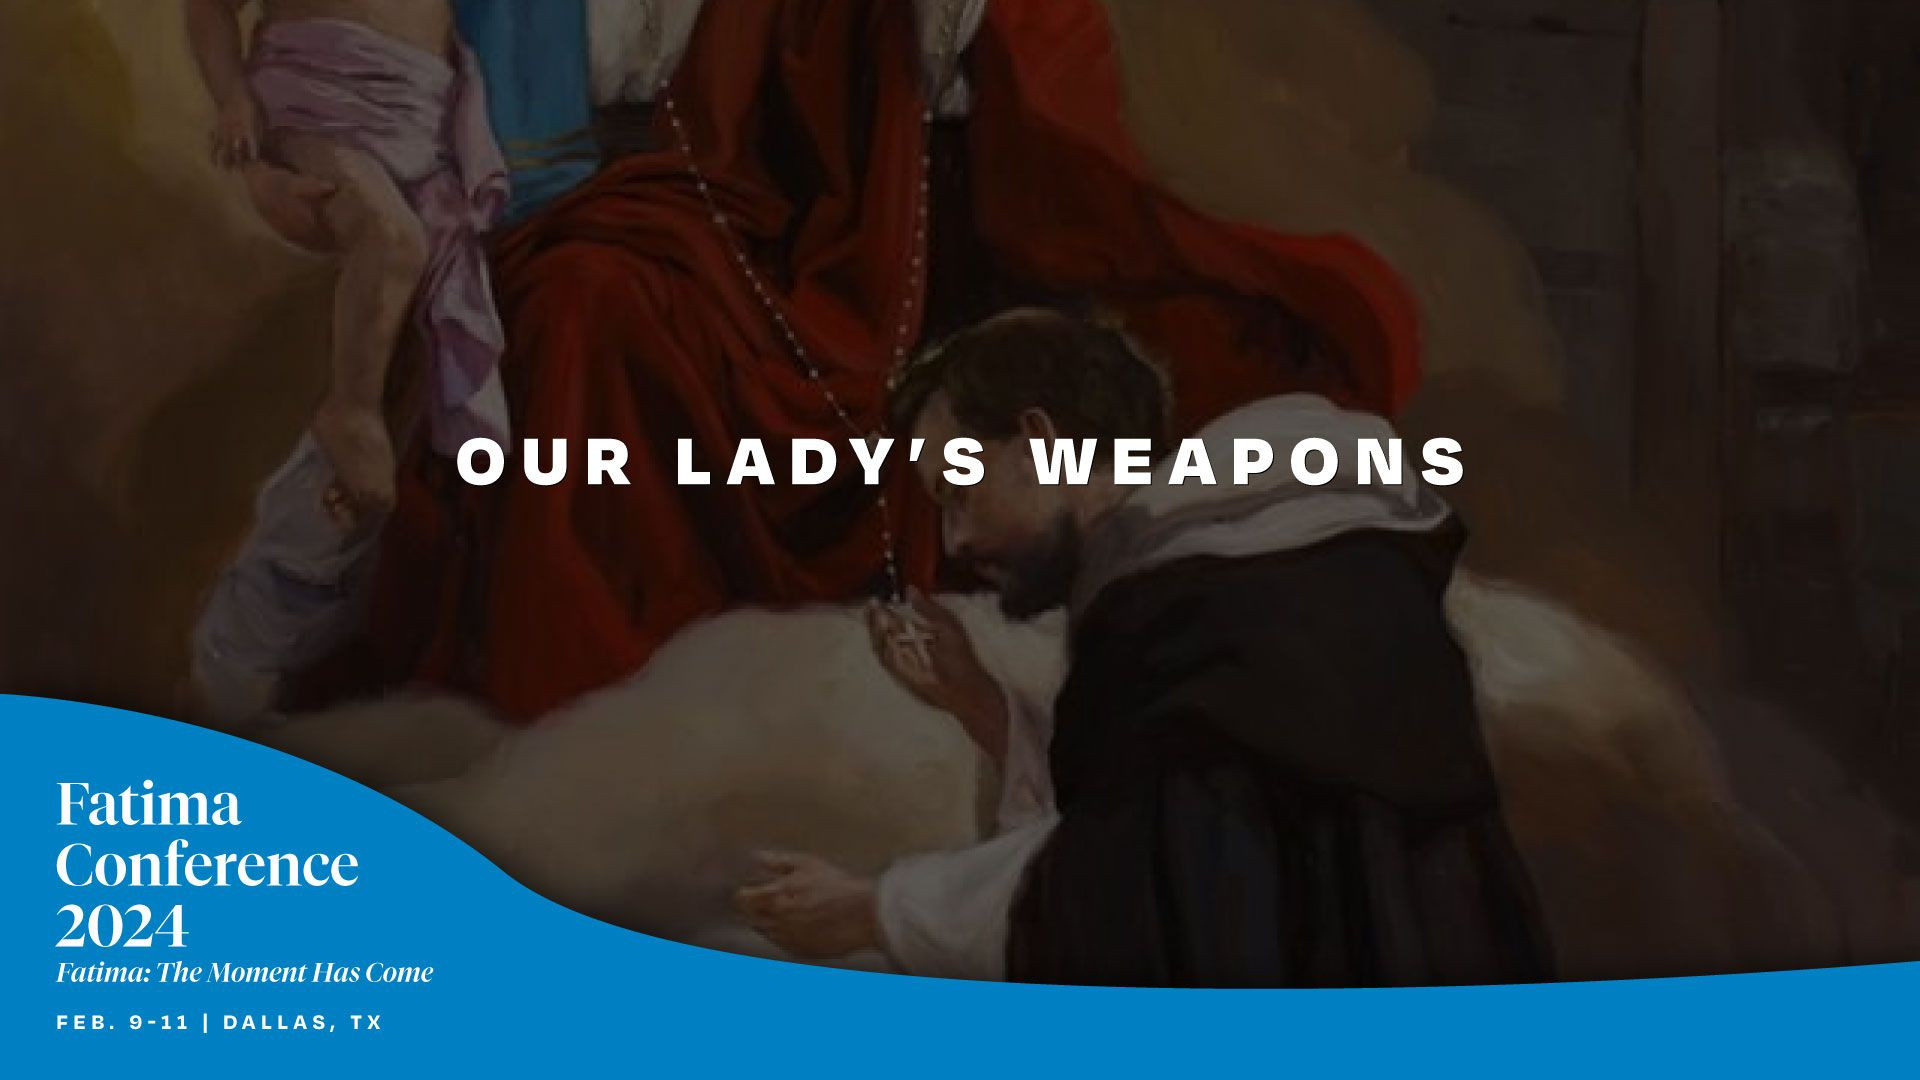 Historical Rebellion Against the Church and Our Lady's Counteract | FC24 Dallas, TX